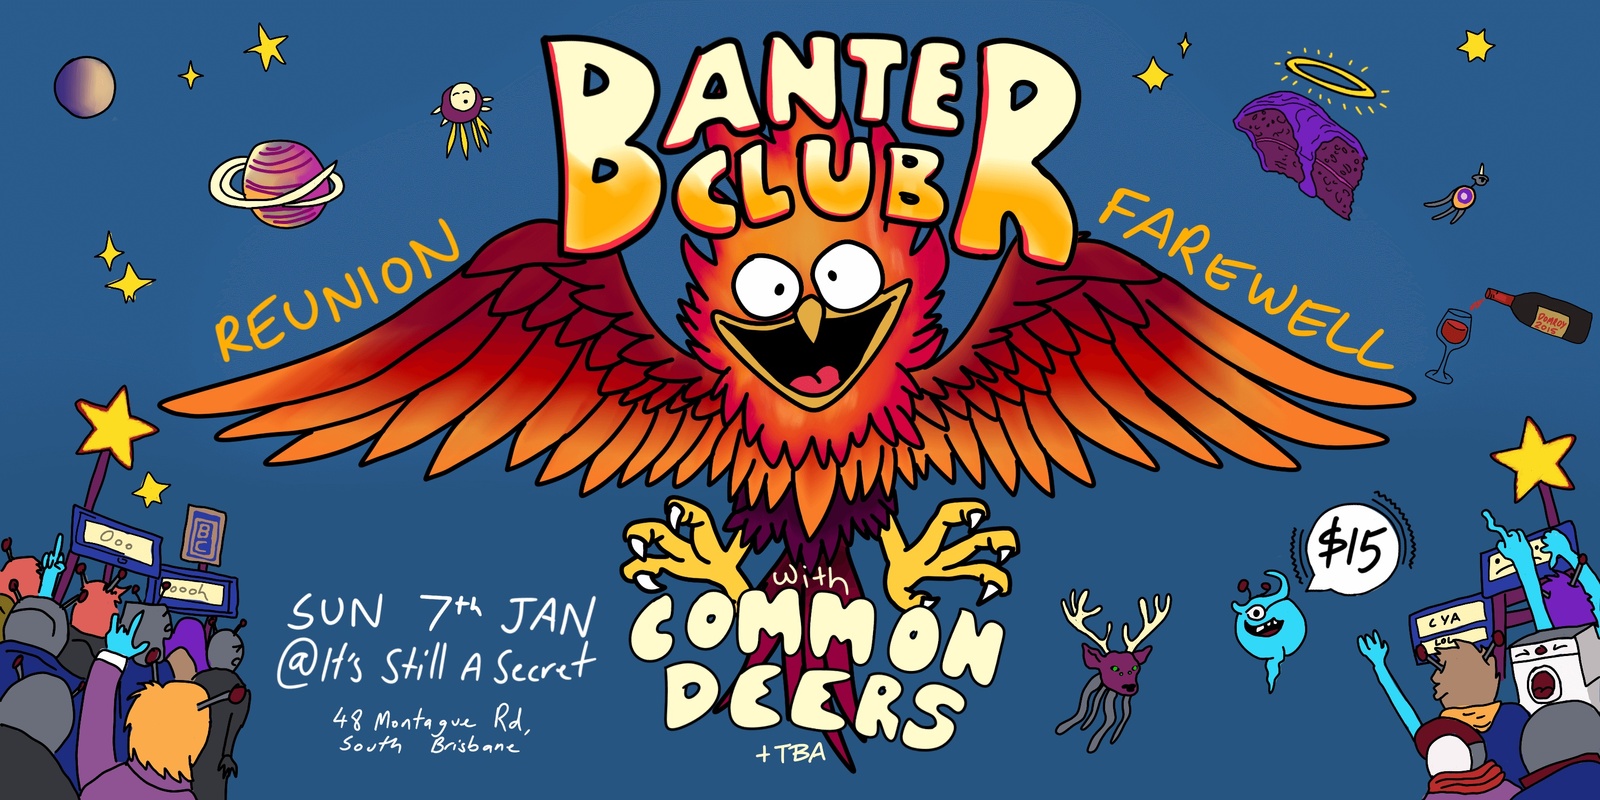 Banner image for BANTER CLUB Reunion & Farewell